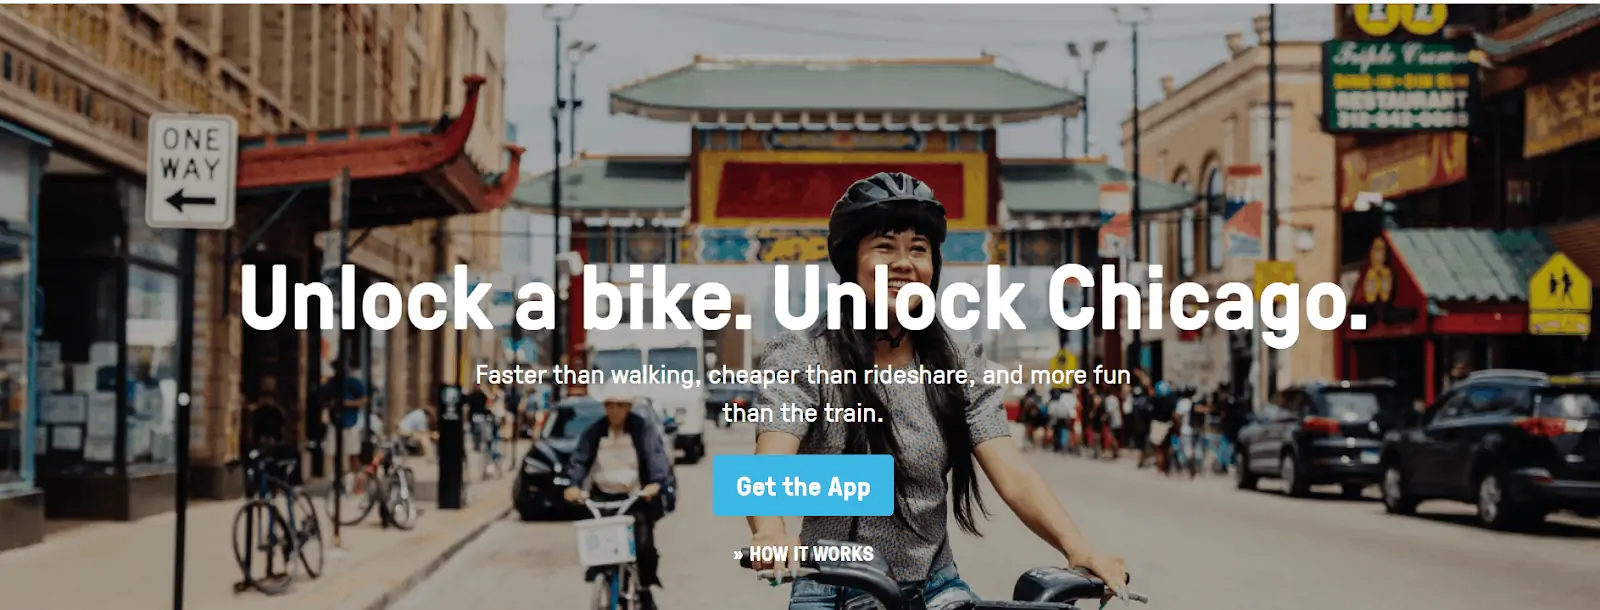 The Divvy bikes homepage